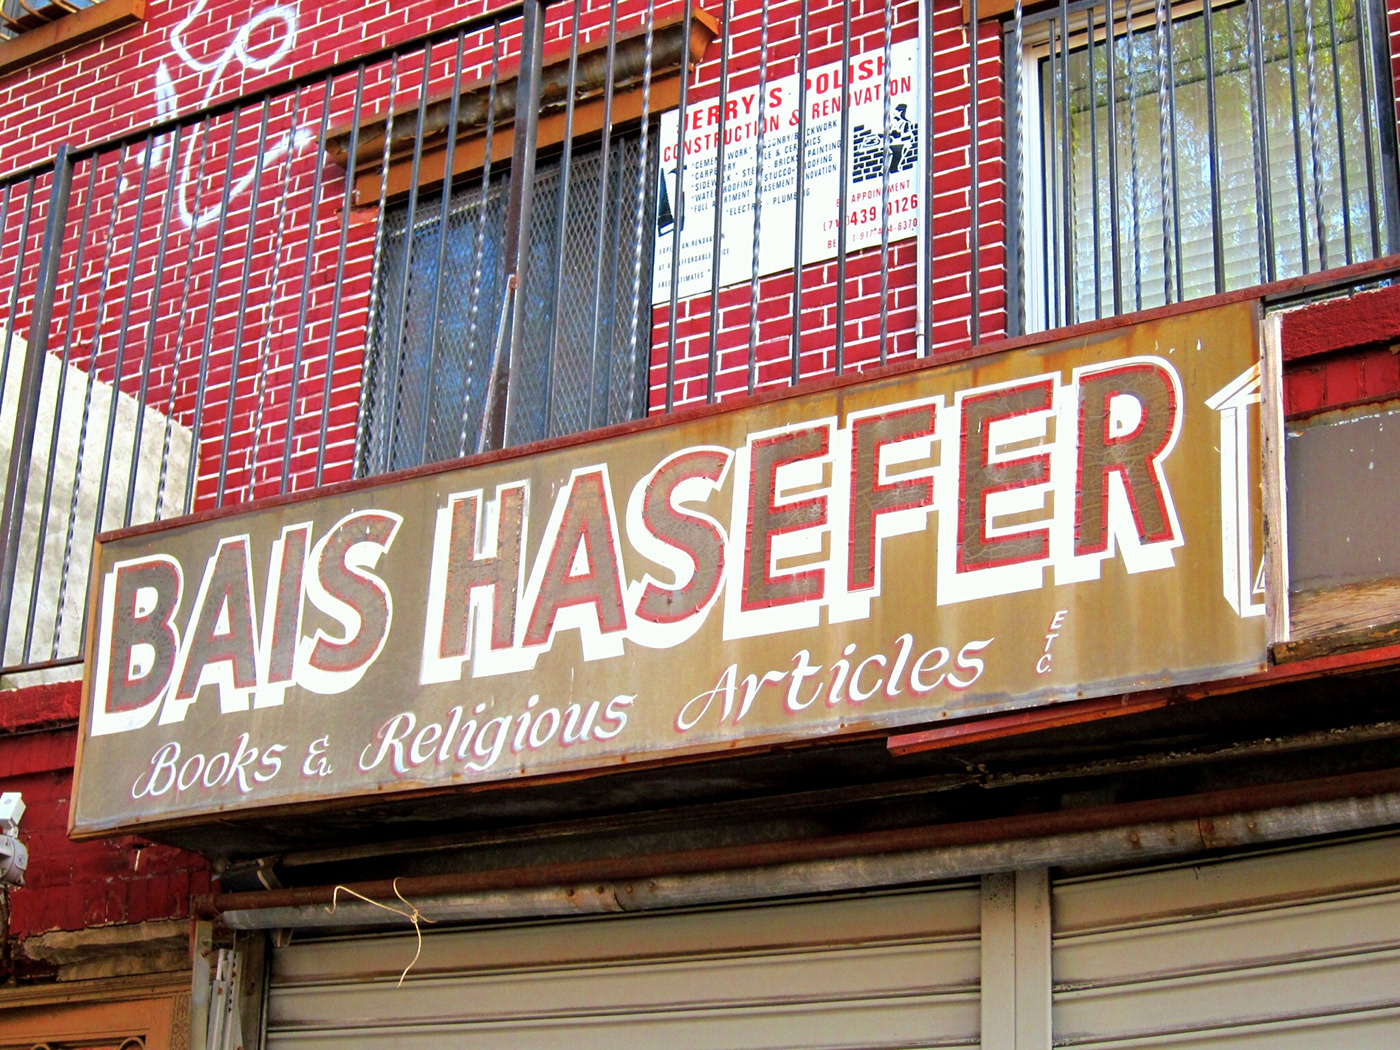 nyc typography   vernacular lettering